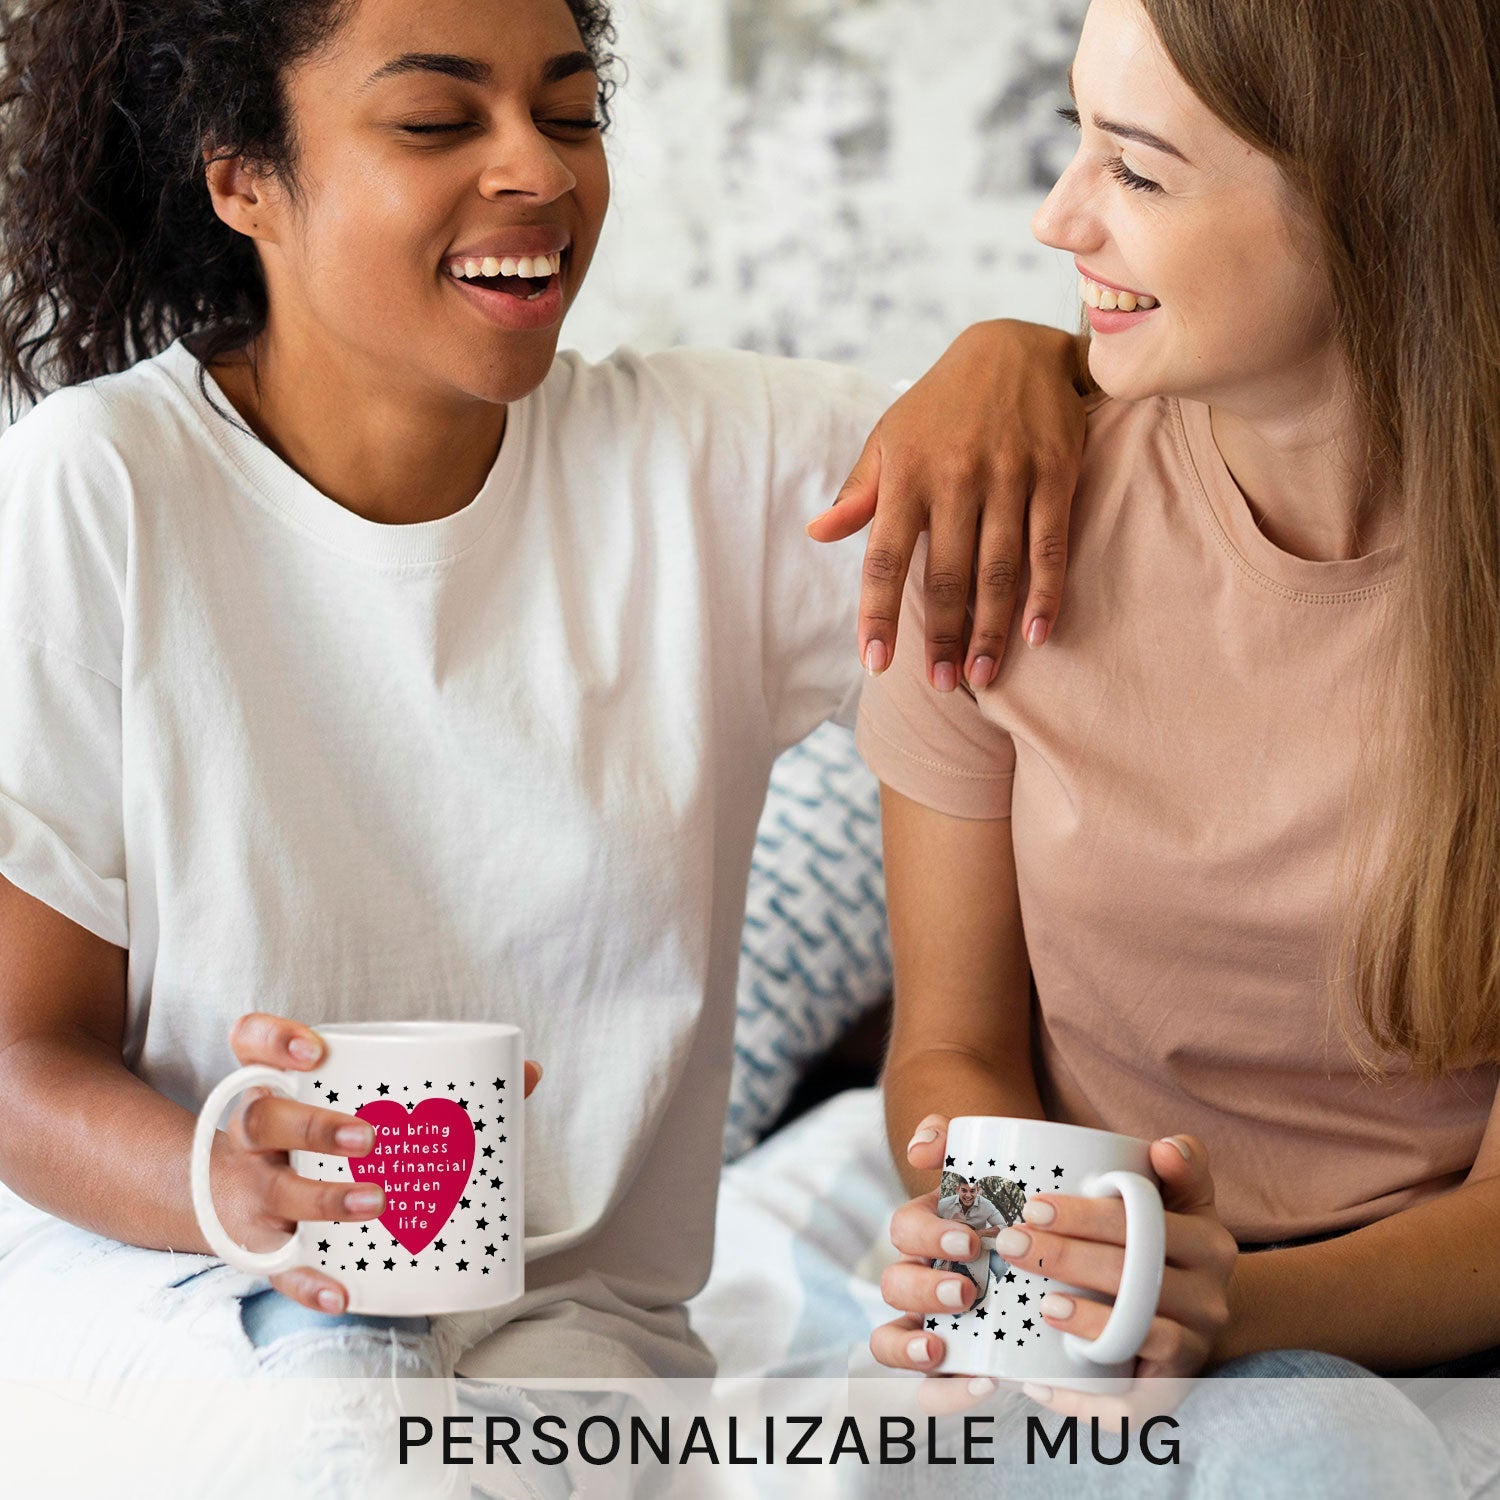 You Bring Darkness And Financial Burden To My Life - Personalized Anniversary, Anti-Valentine's Day, Birthday or Christmas gift For Him or Her - Custom Mug - MyMindfulGifts